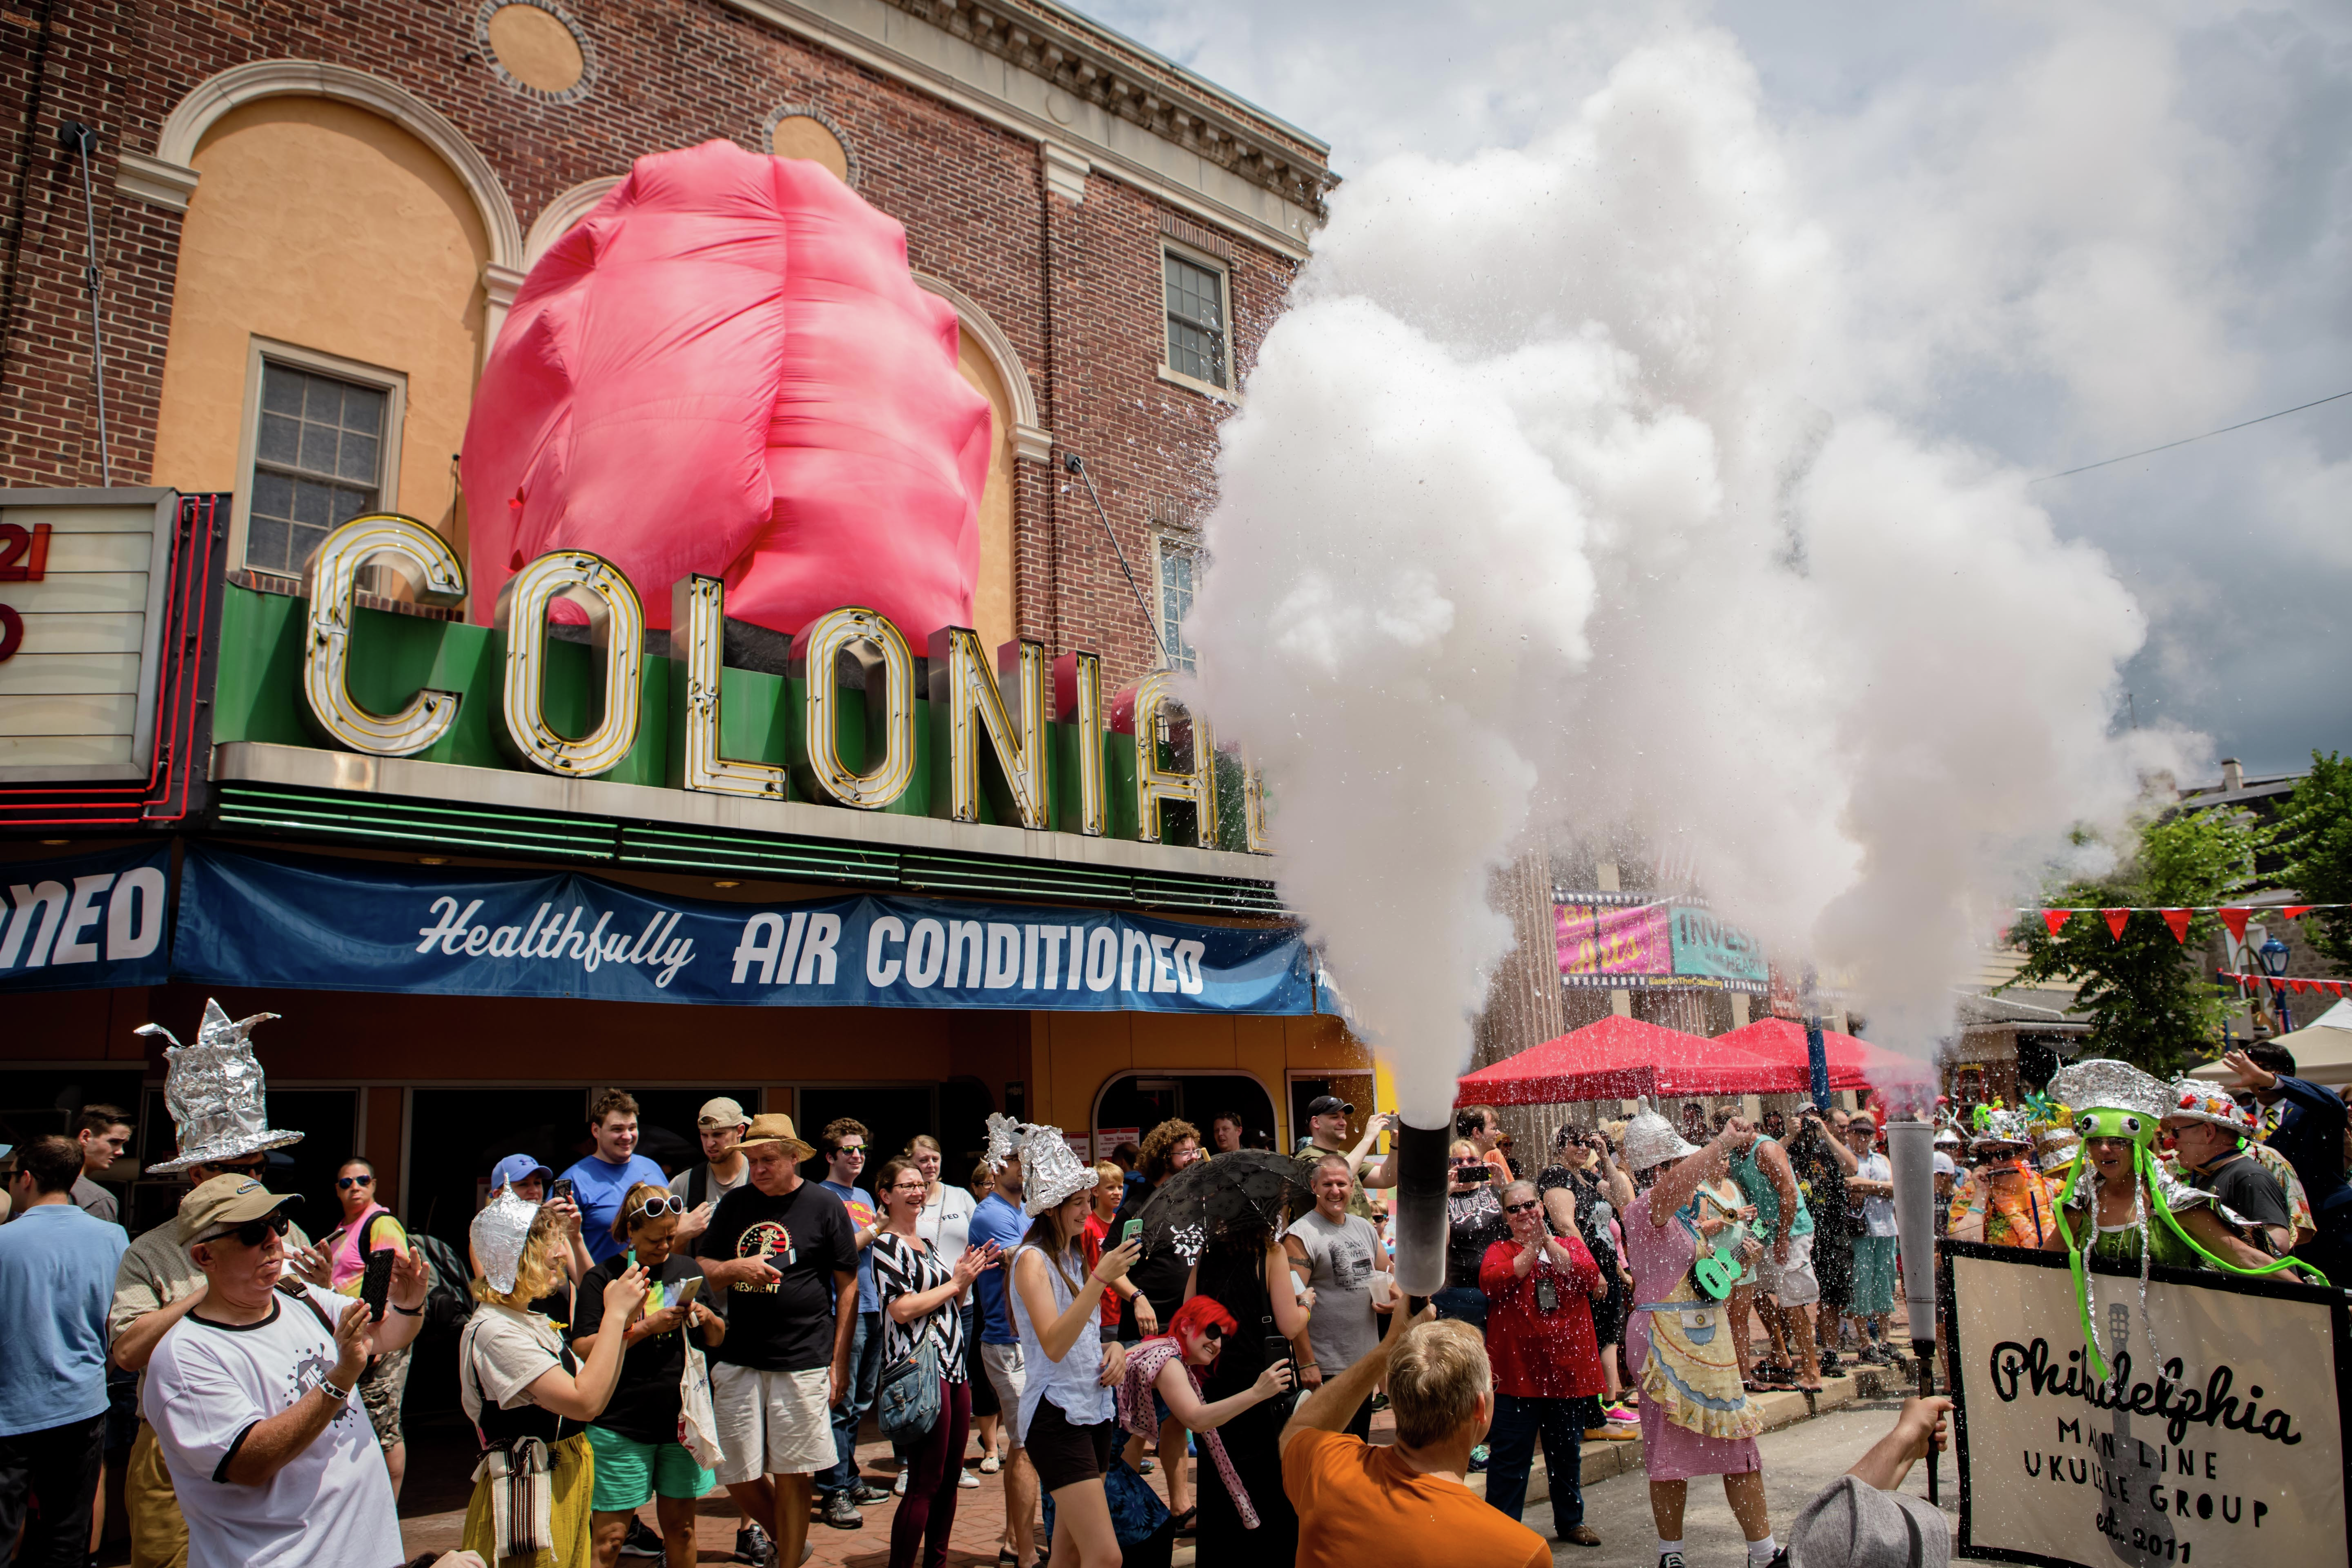 Blobfest oozes through Phoenixville for its 25th anniversary celebration